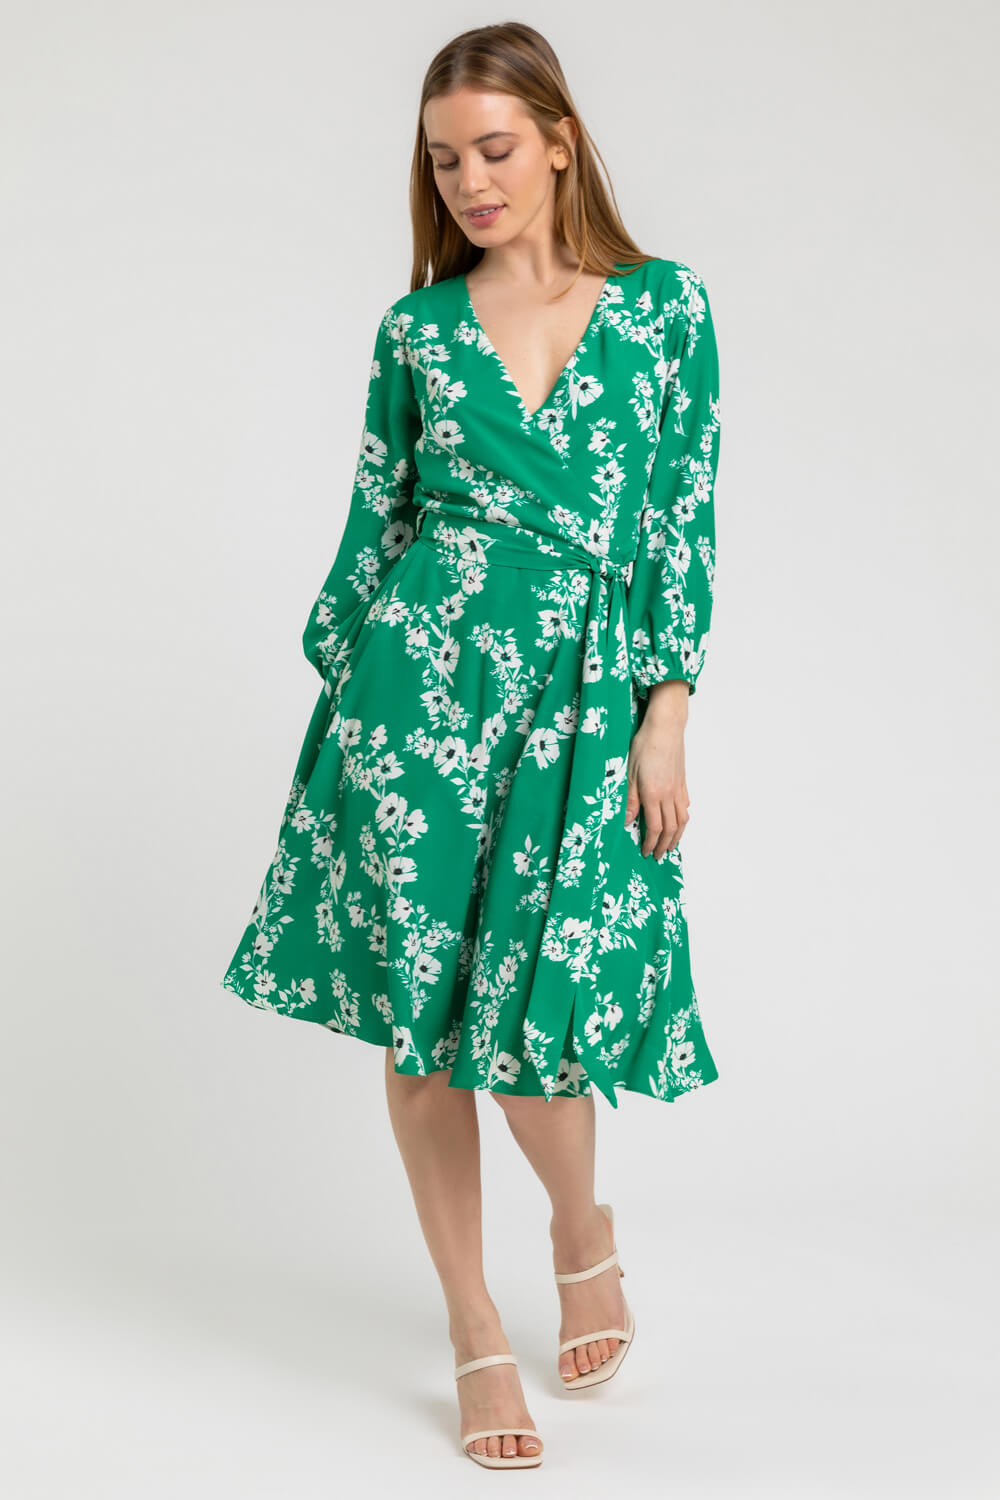 Green Petite Floral Fit & Flare Dress, Image 3 of 4